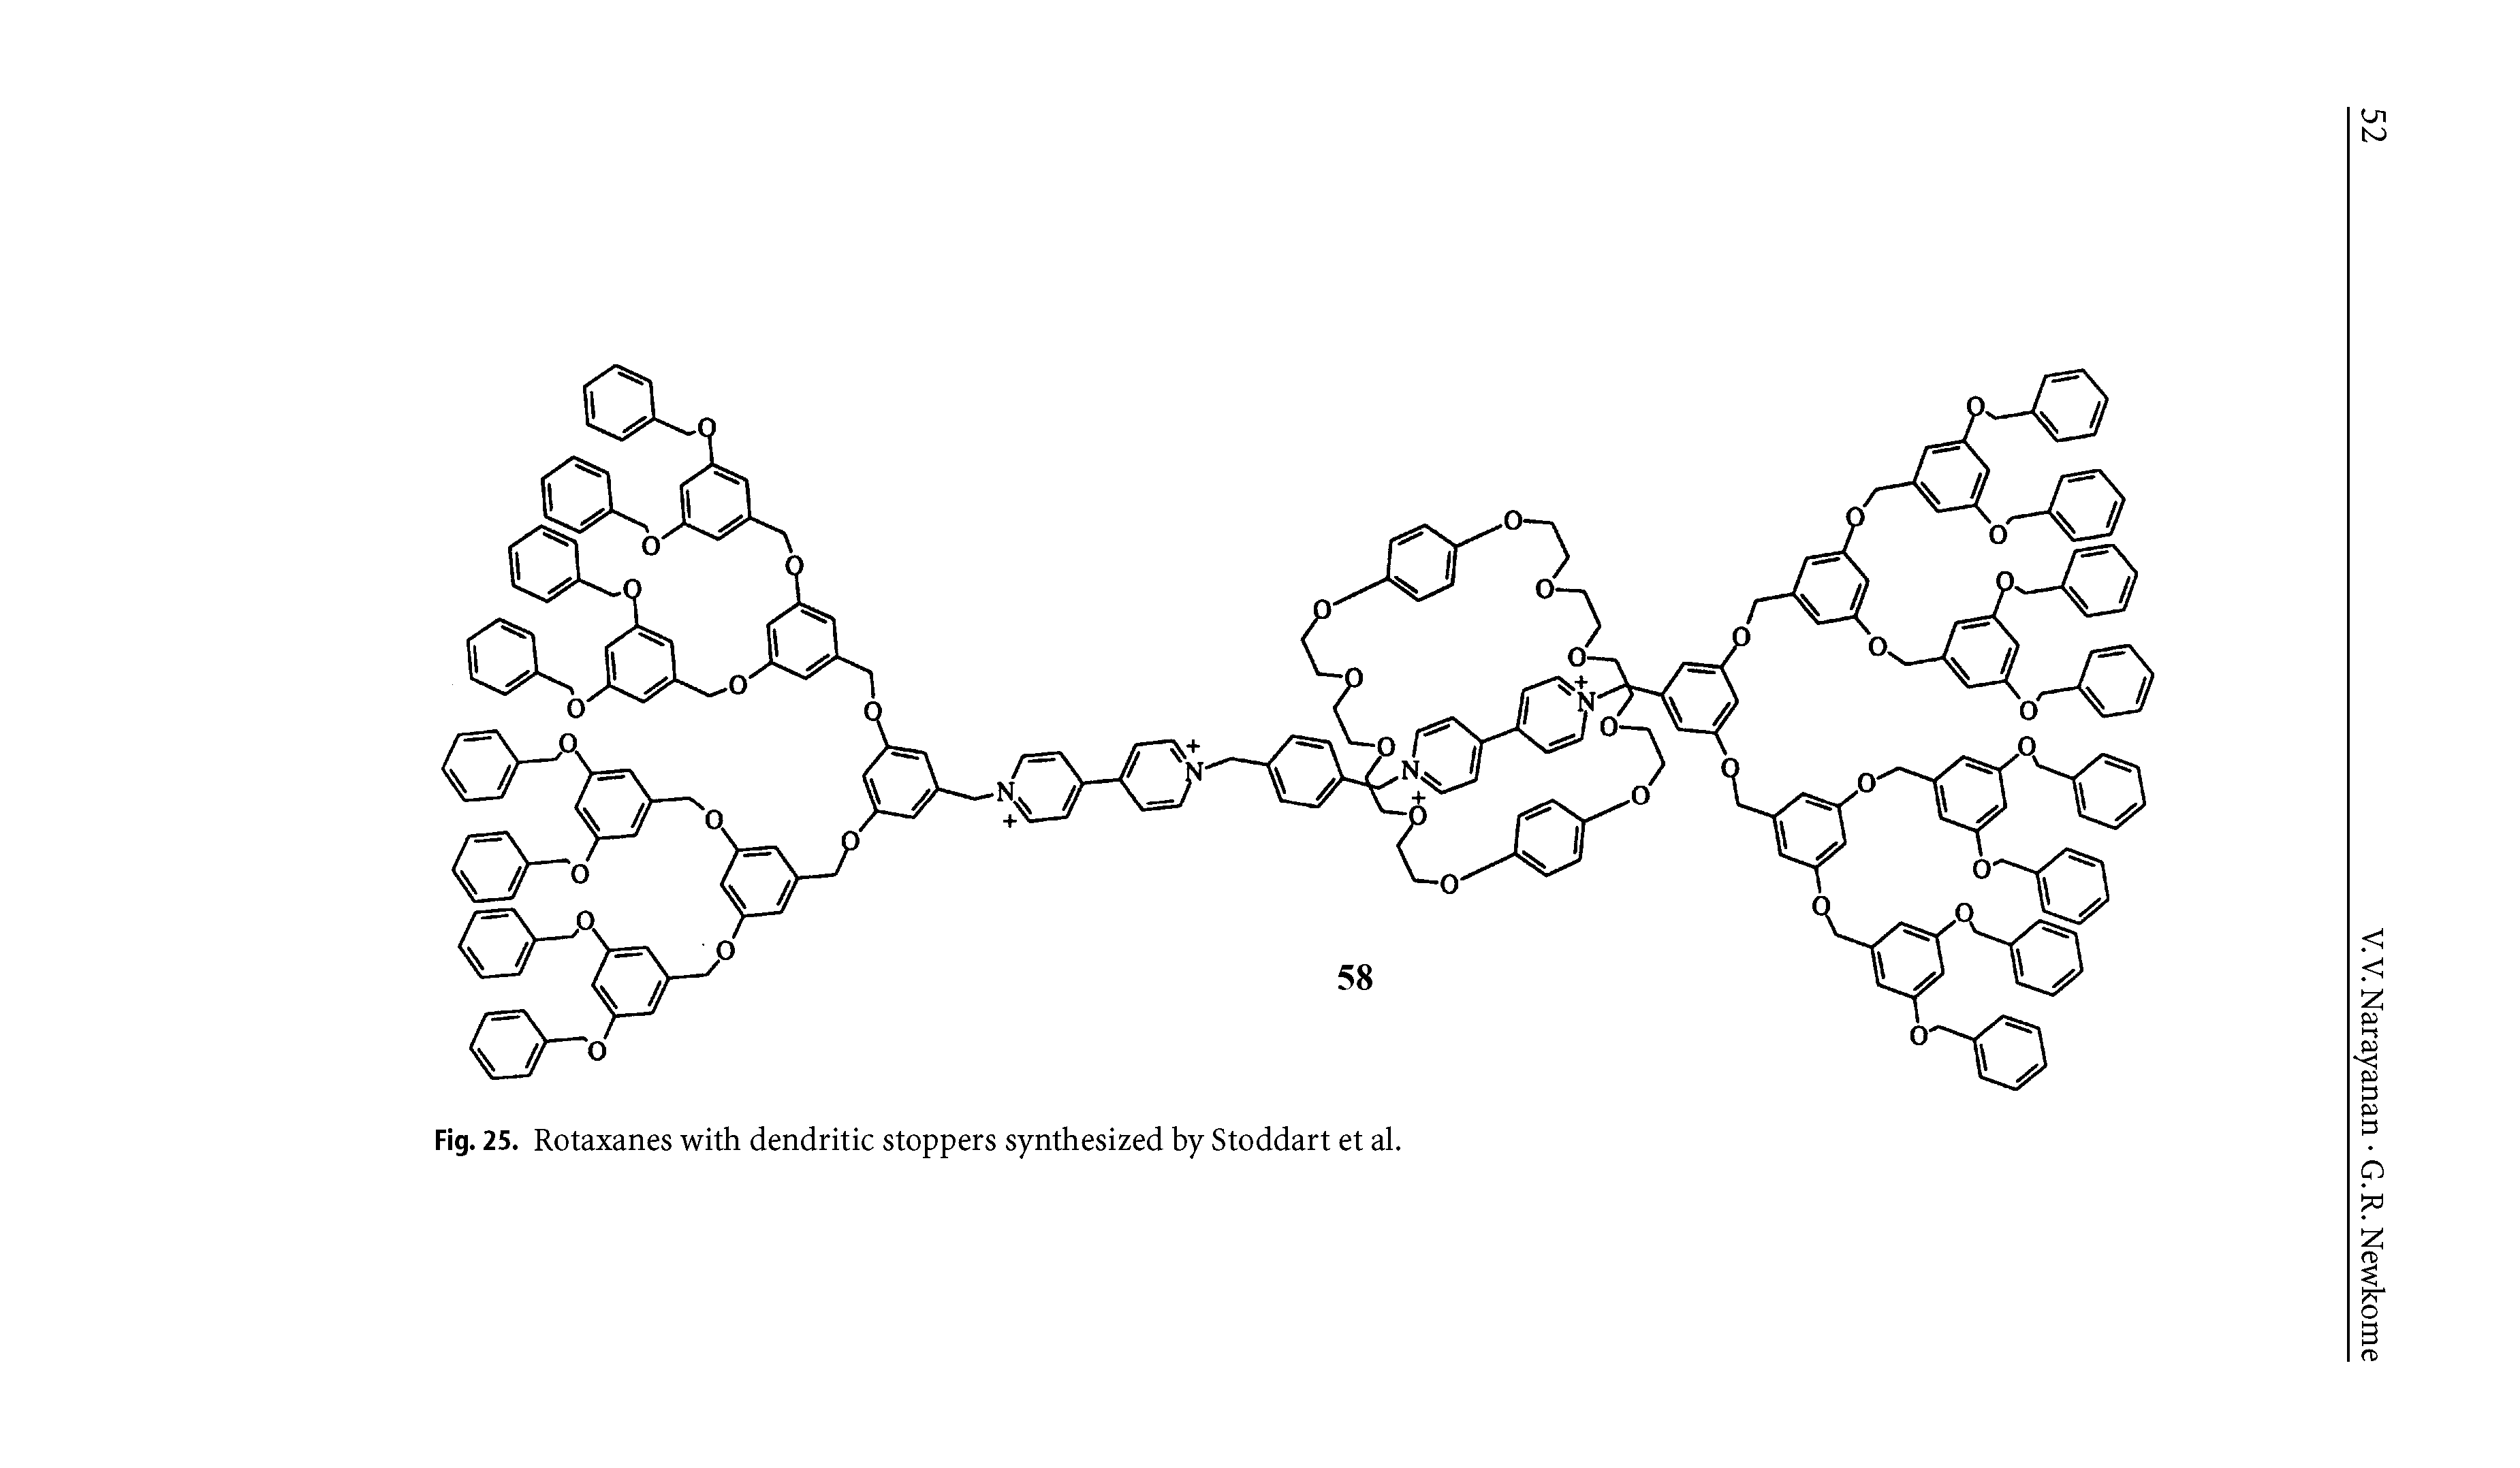 Fig. 25. Rotaxanes with dendritic stoppers synthesized by Stoddart et al.